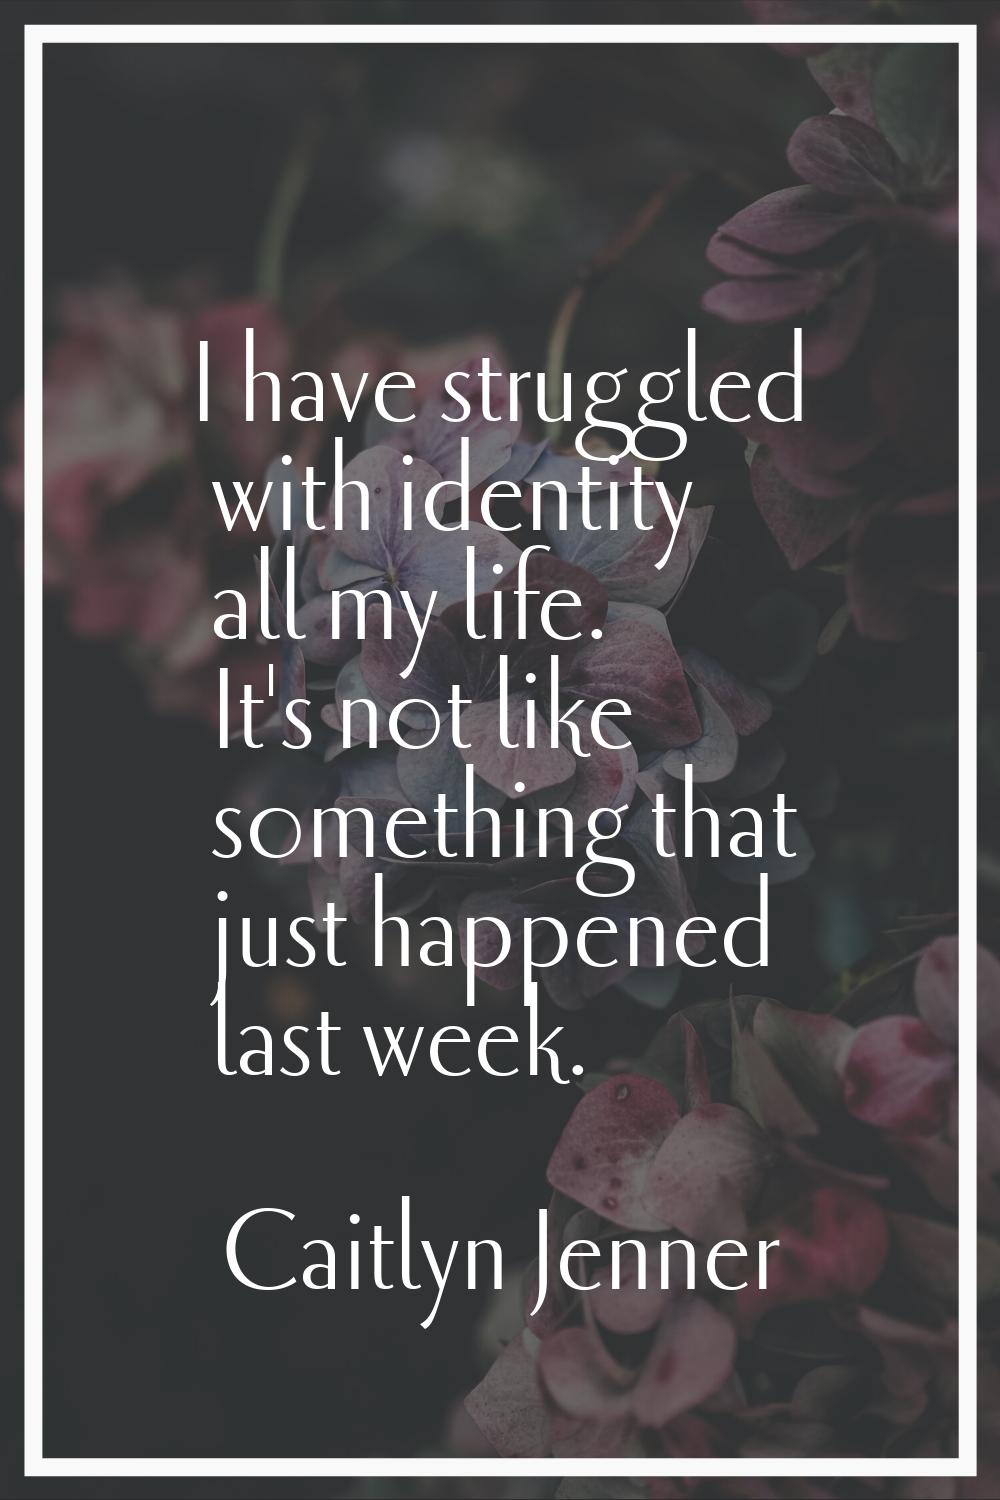 I have struggled with identity all my life. It's not like something that just happened last week.